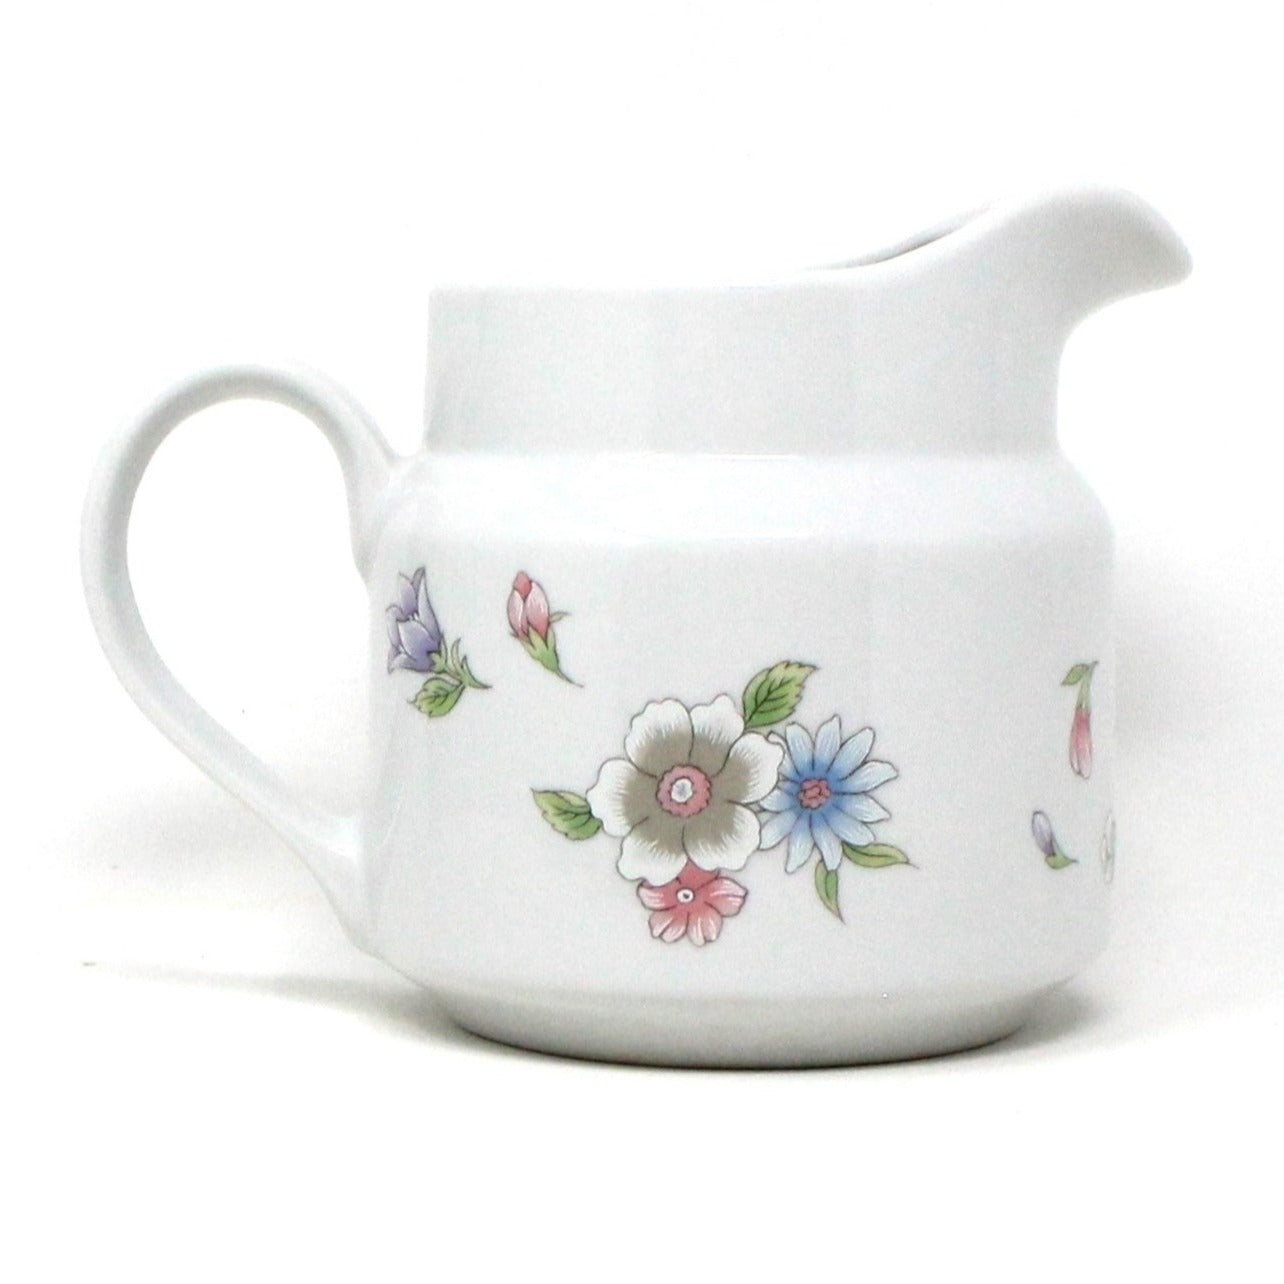 Milk Pitcher, FTD, Especially For You, Vintage Japan